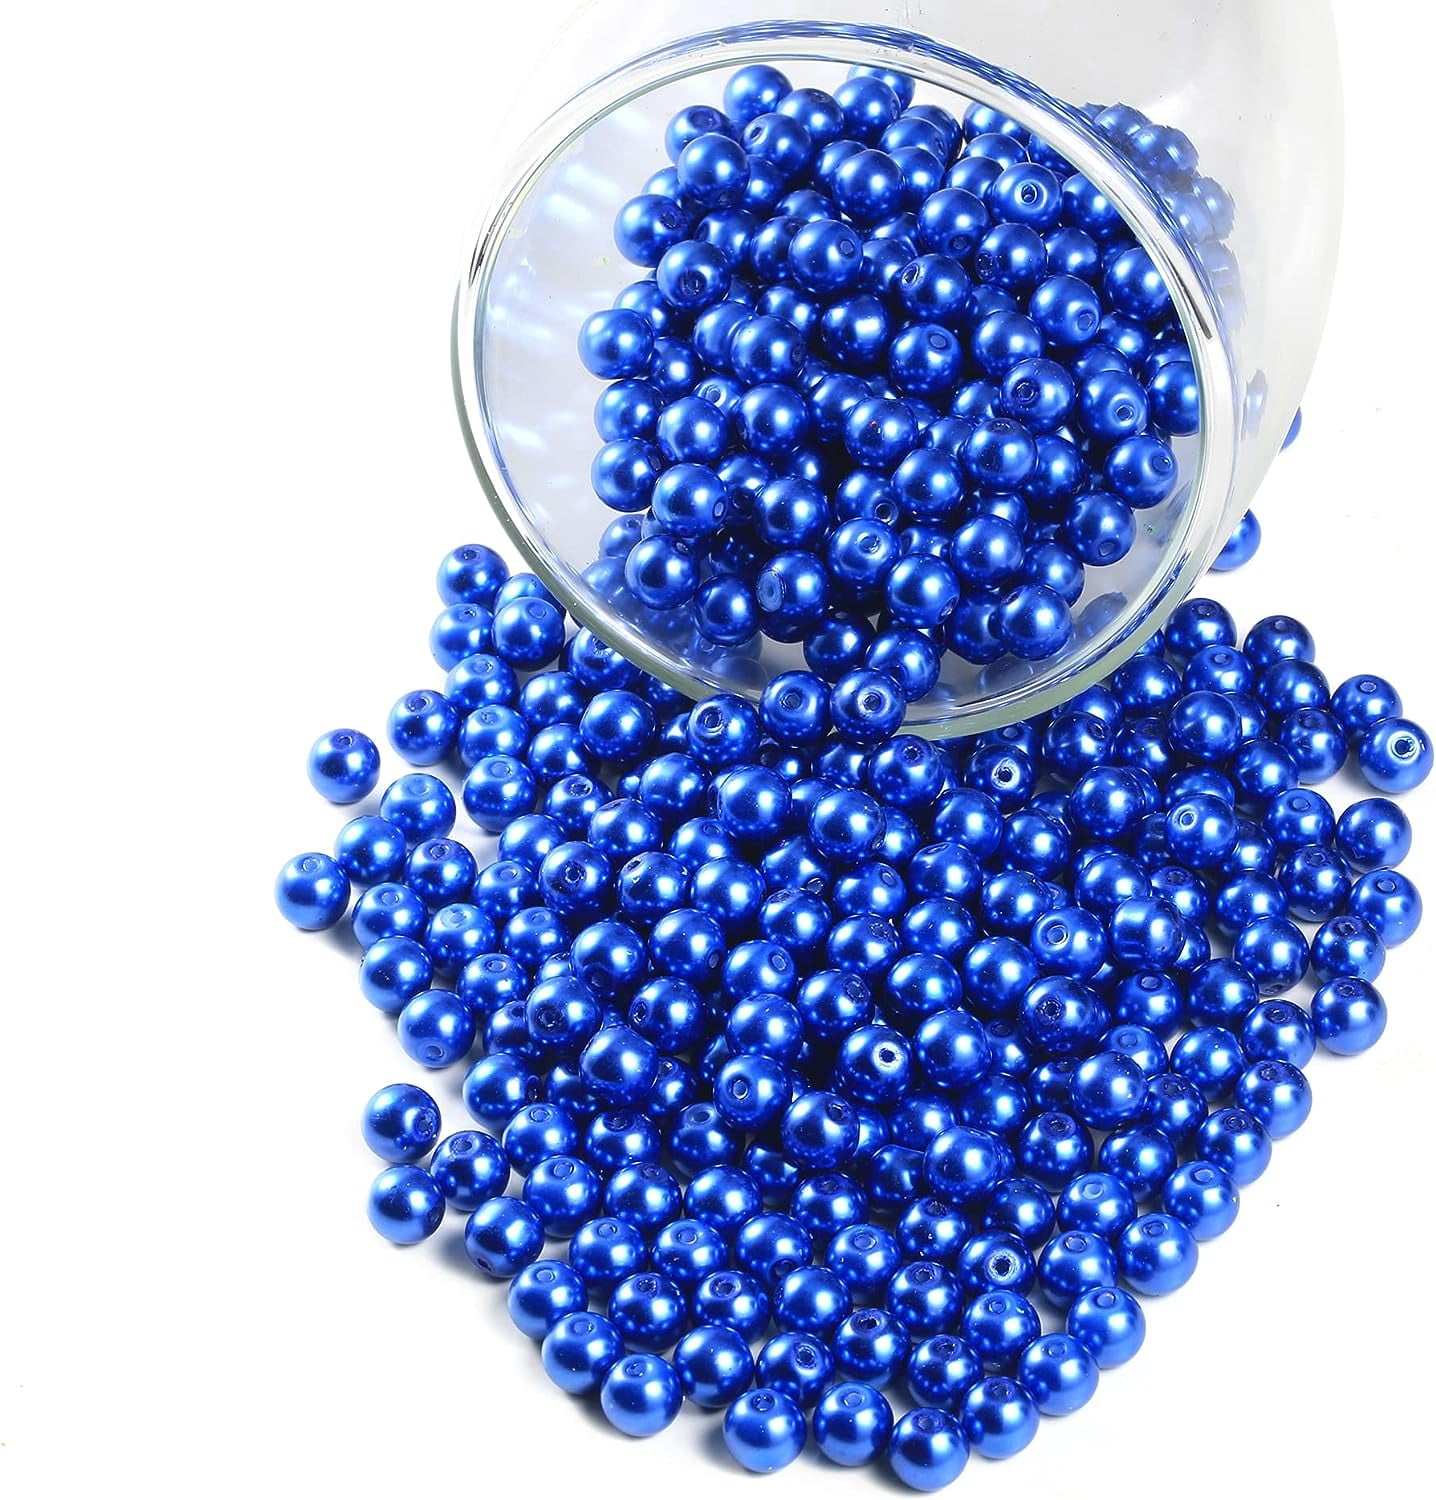 Bungalow Daisy Floating Teal Blue/Light Blue Pearls Centerpieces 80pcs Mix Size Pearls, Size: 10-30mm.